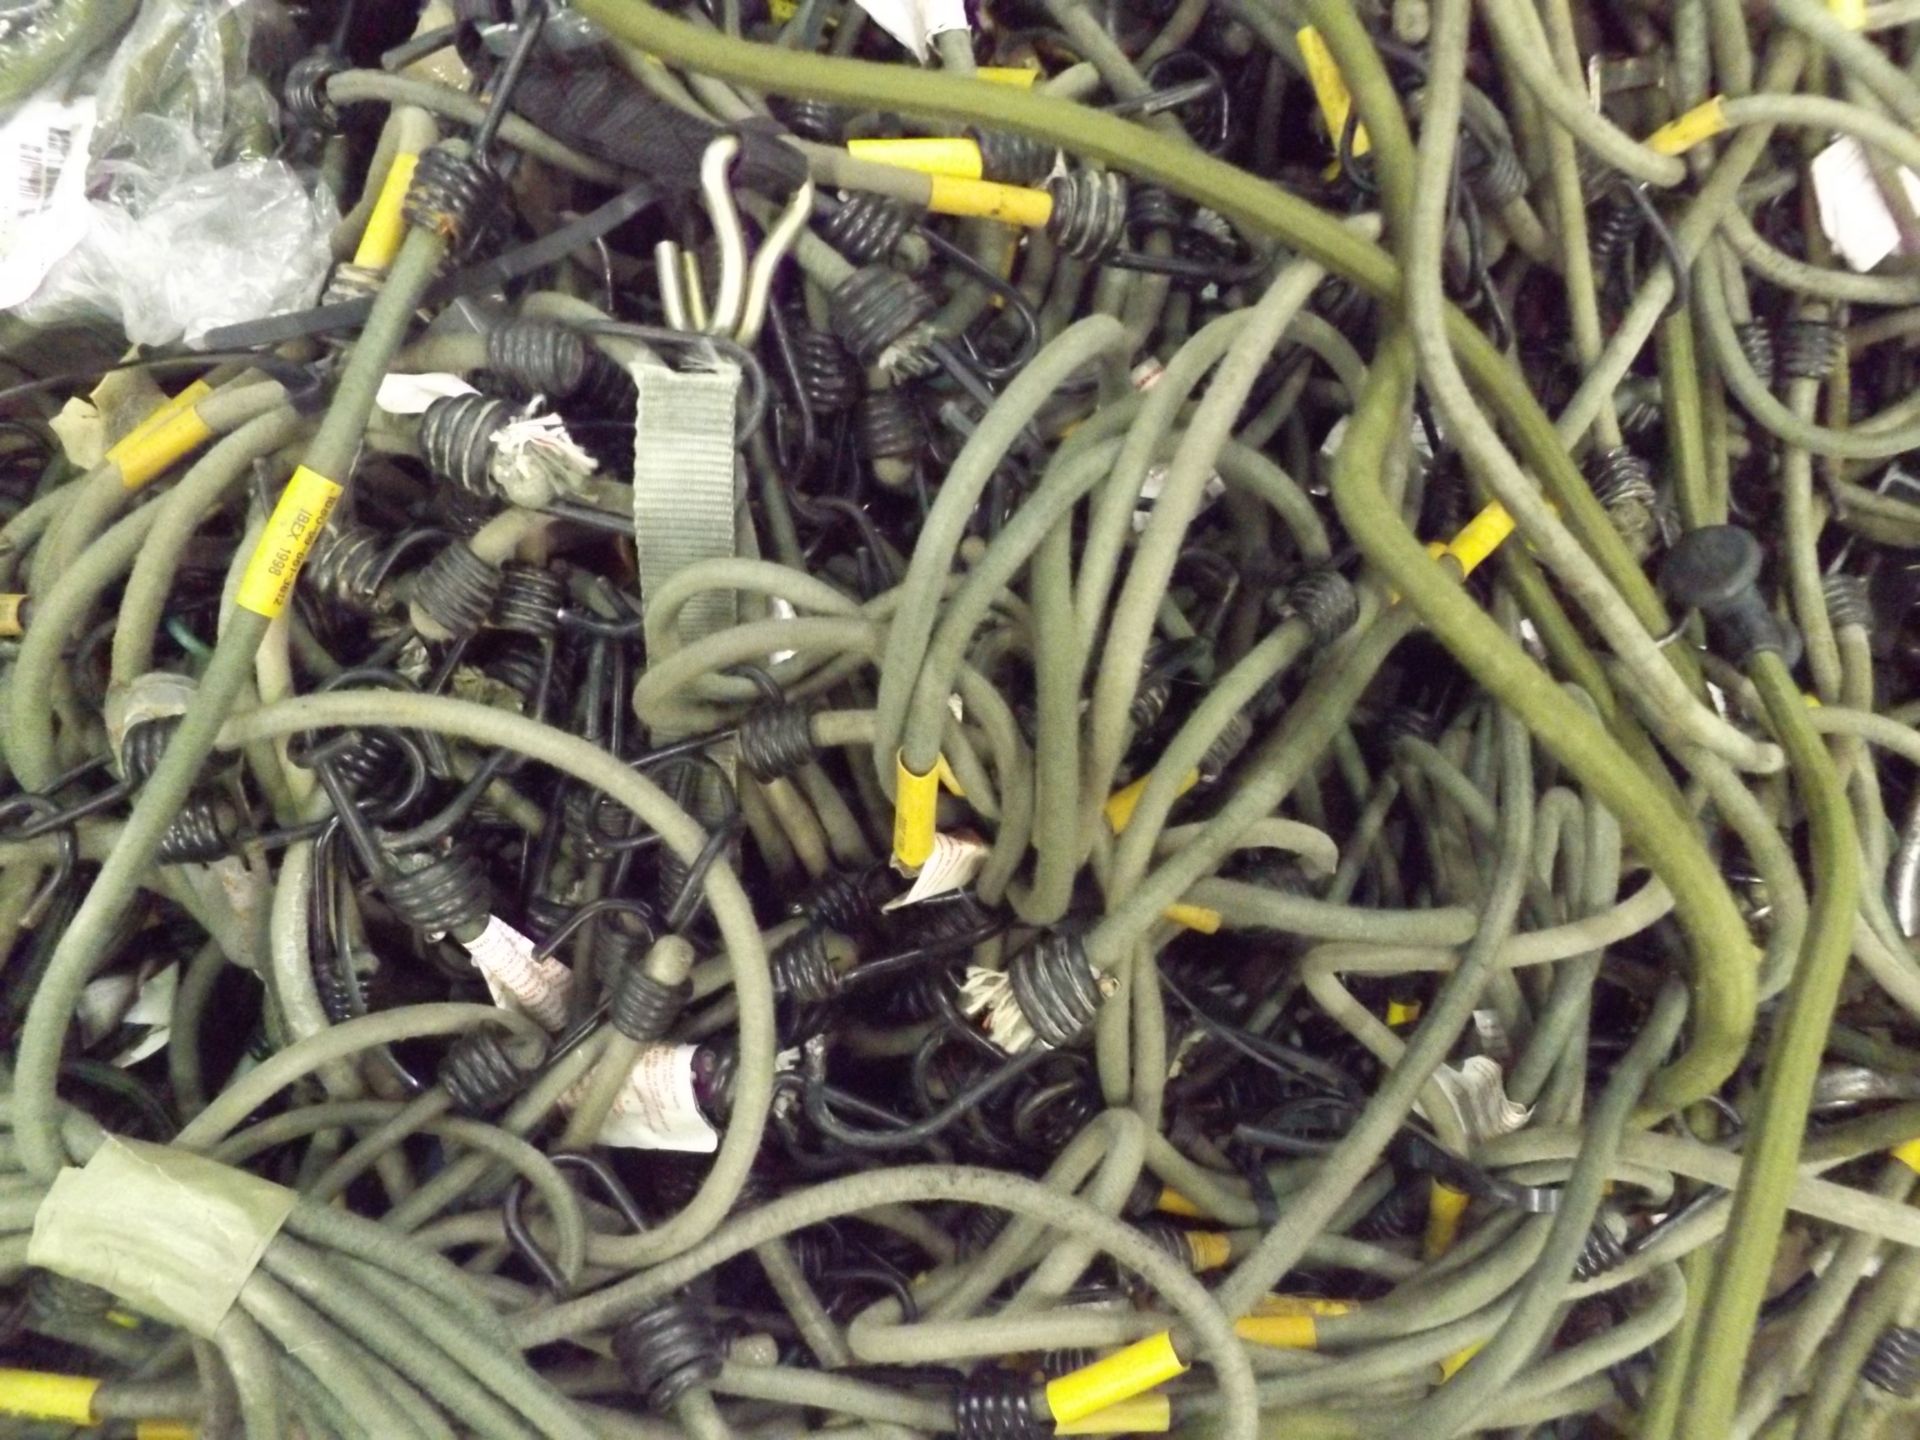 Stillage of Mixed Bungie Cords - Image 2 of 3